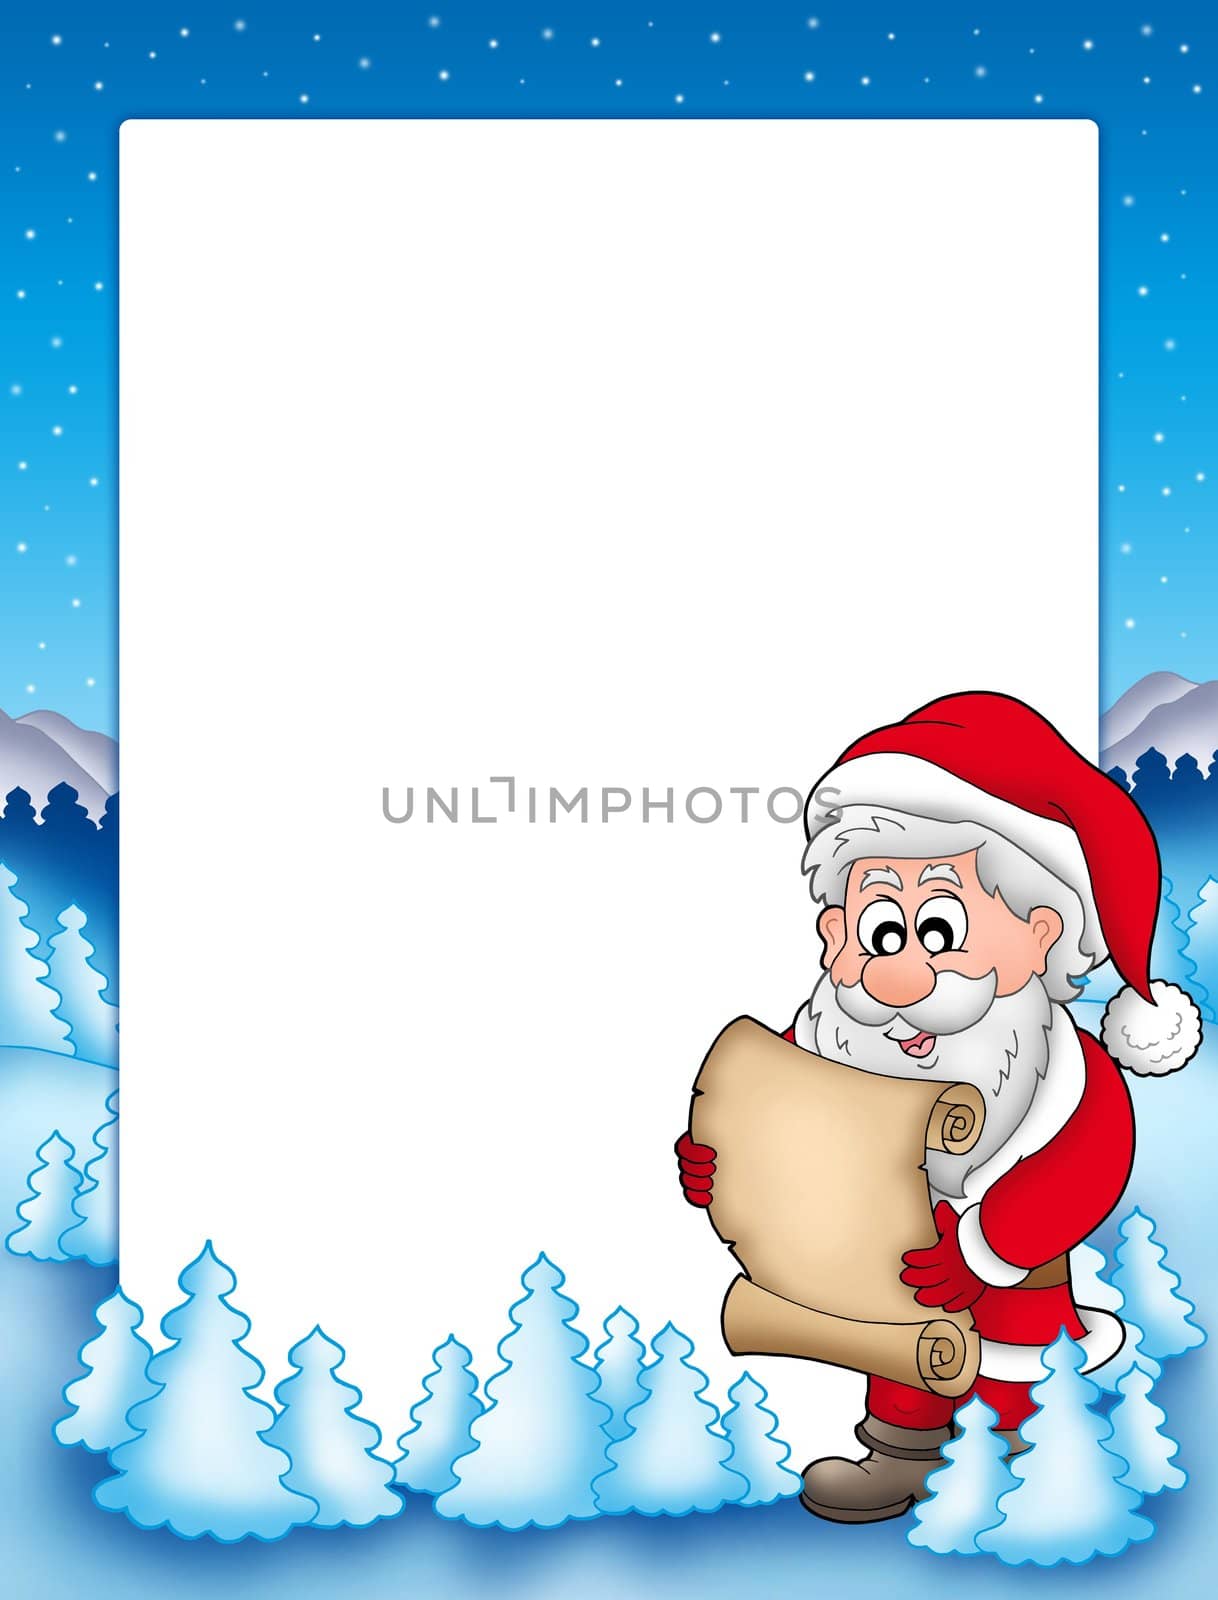 Frame with Santa and parchment - color illustration.